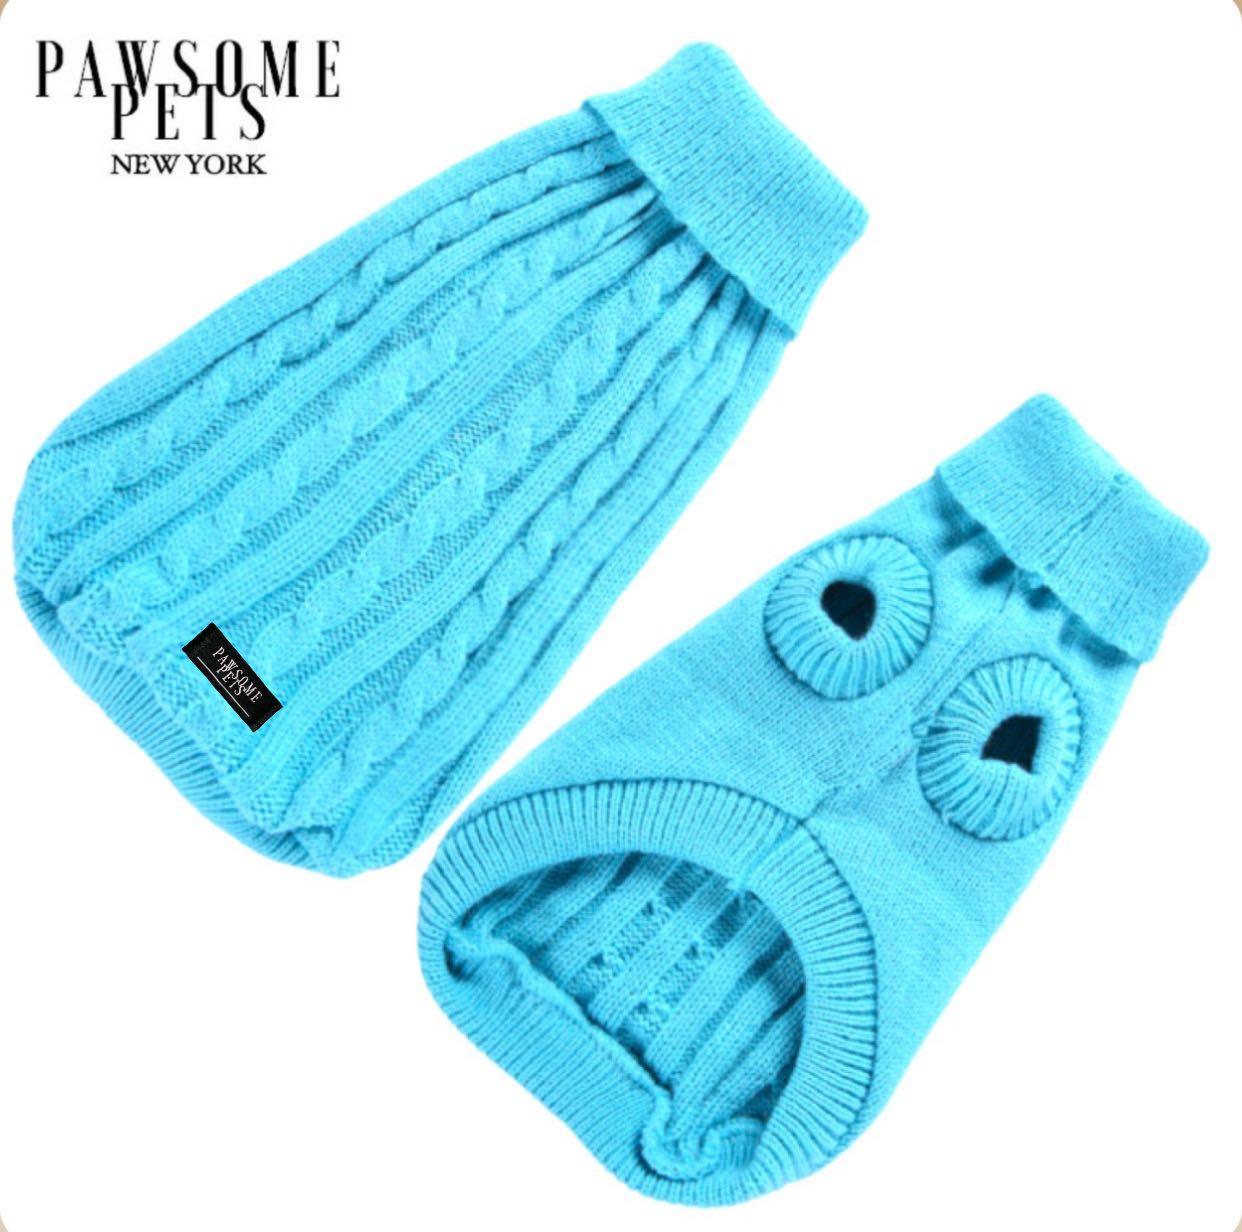 DOG AND CAT CABLE KNIT SWEATER - SKY BLUE